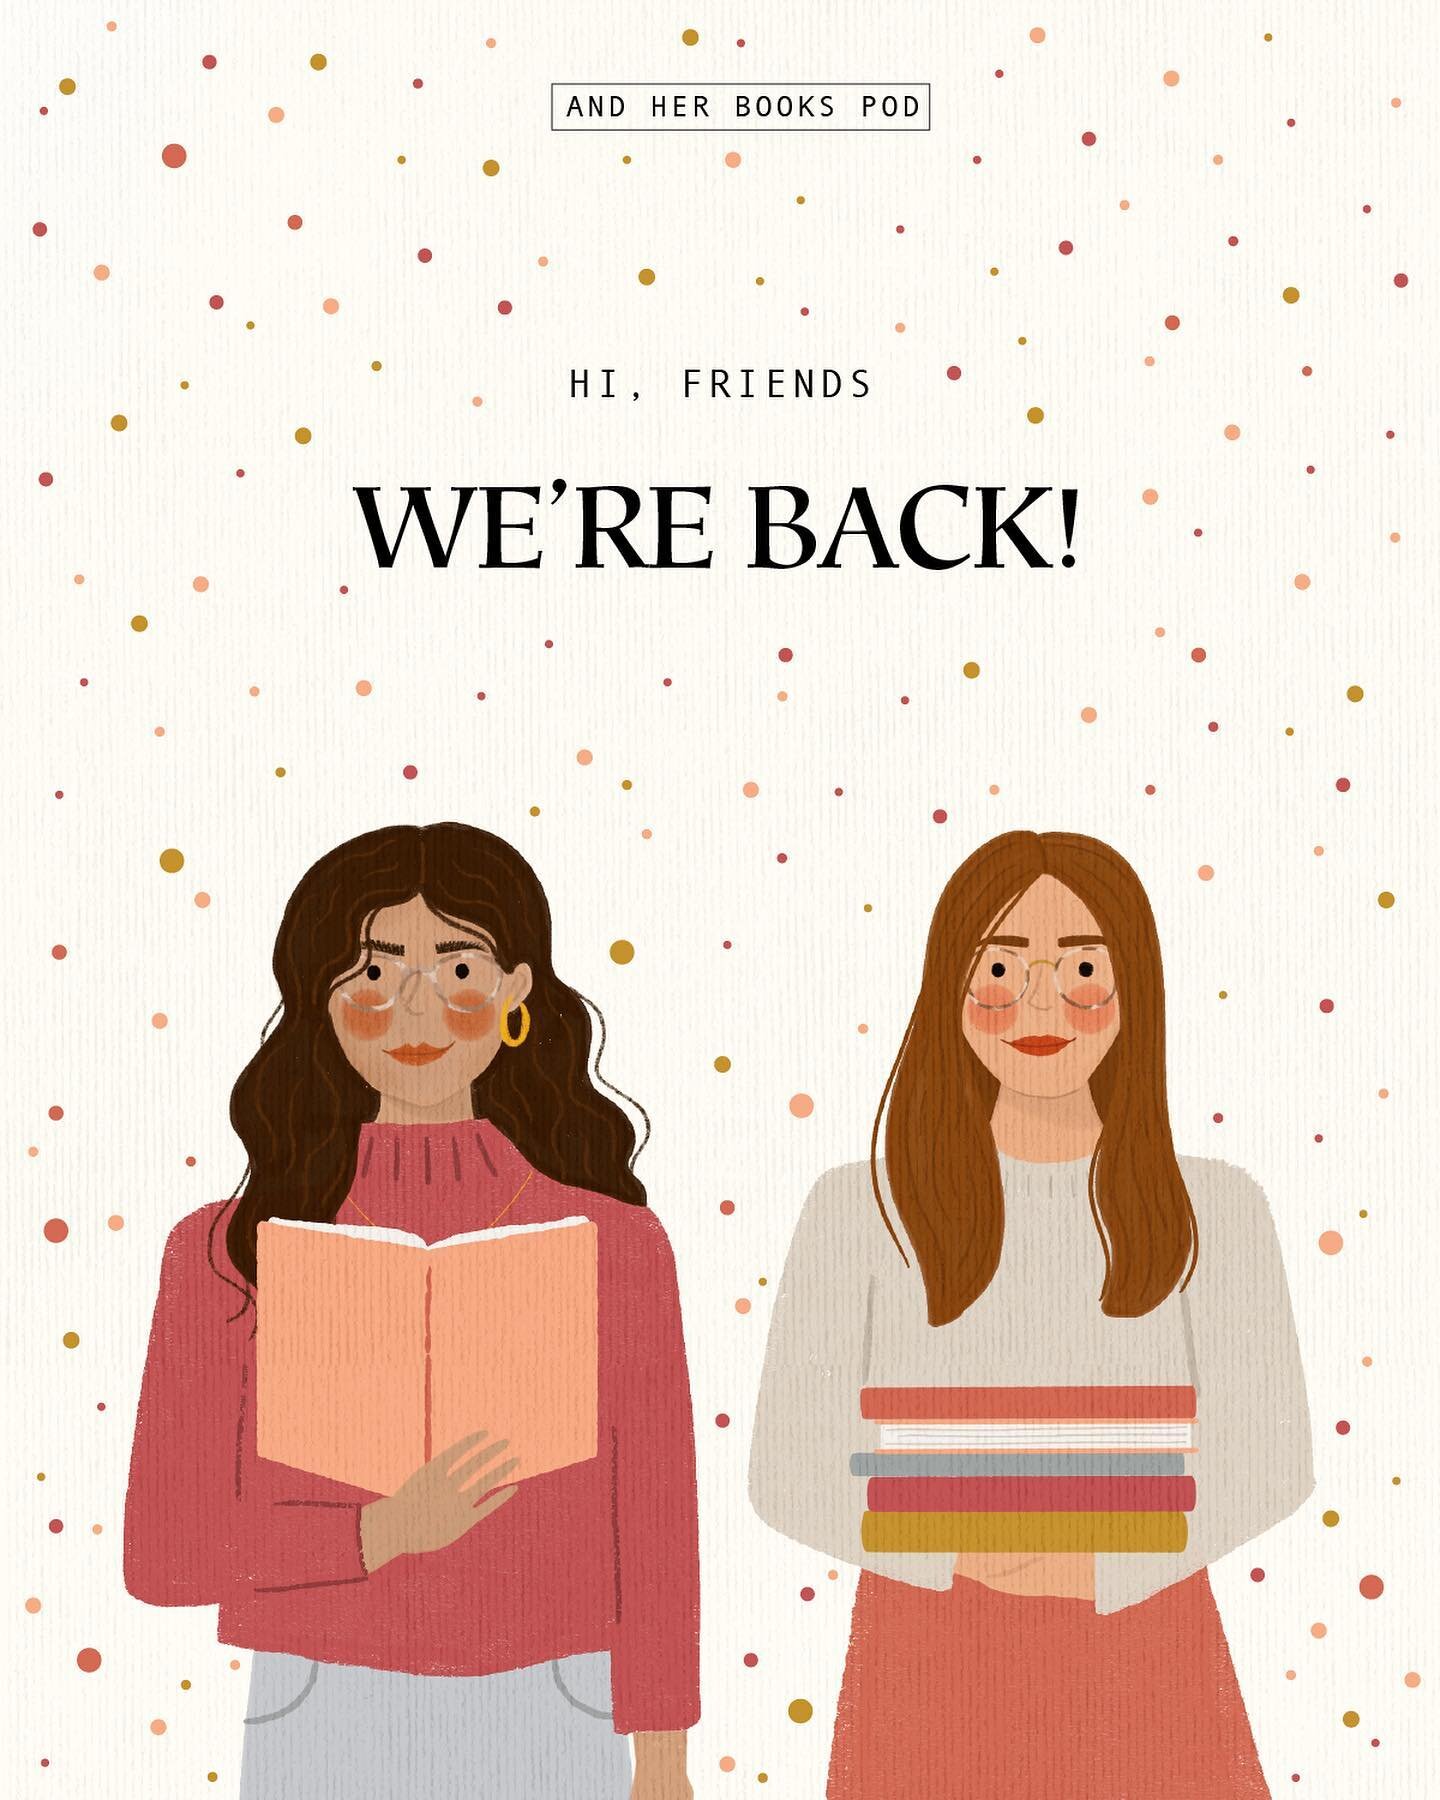 WE&rsquo;RE BACK! ✨

We are so excited to share that And Her Books is back! Our teaser episode is out now, all about the break we took and the new episode format we&rsquo;ll have moving forward.

You can listen at the link in our bio or anywhere you 